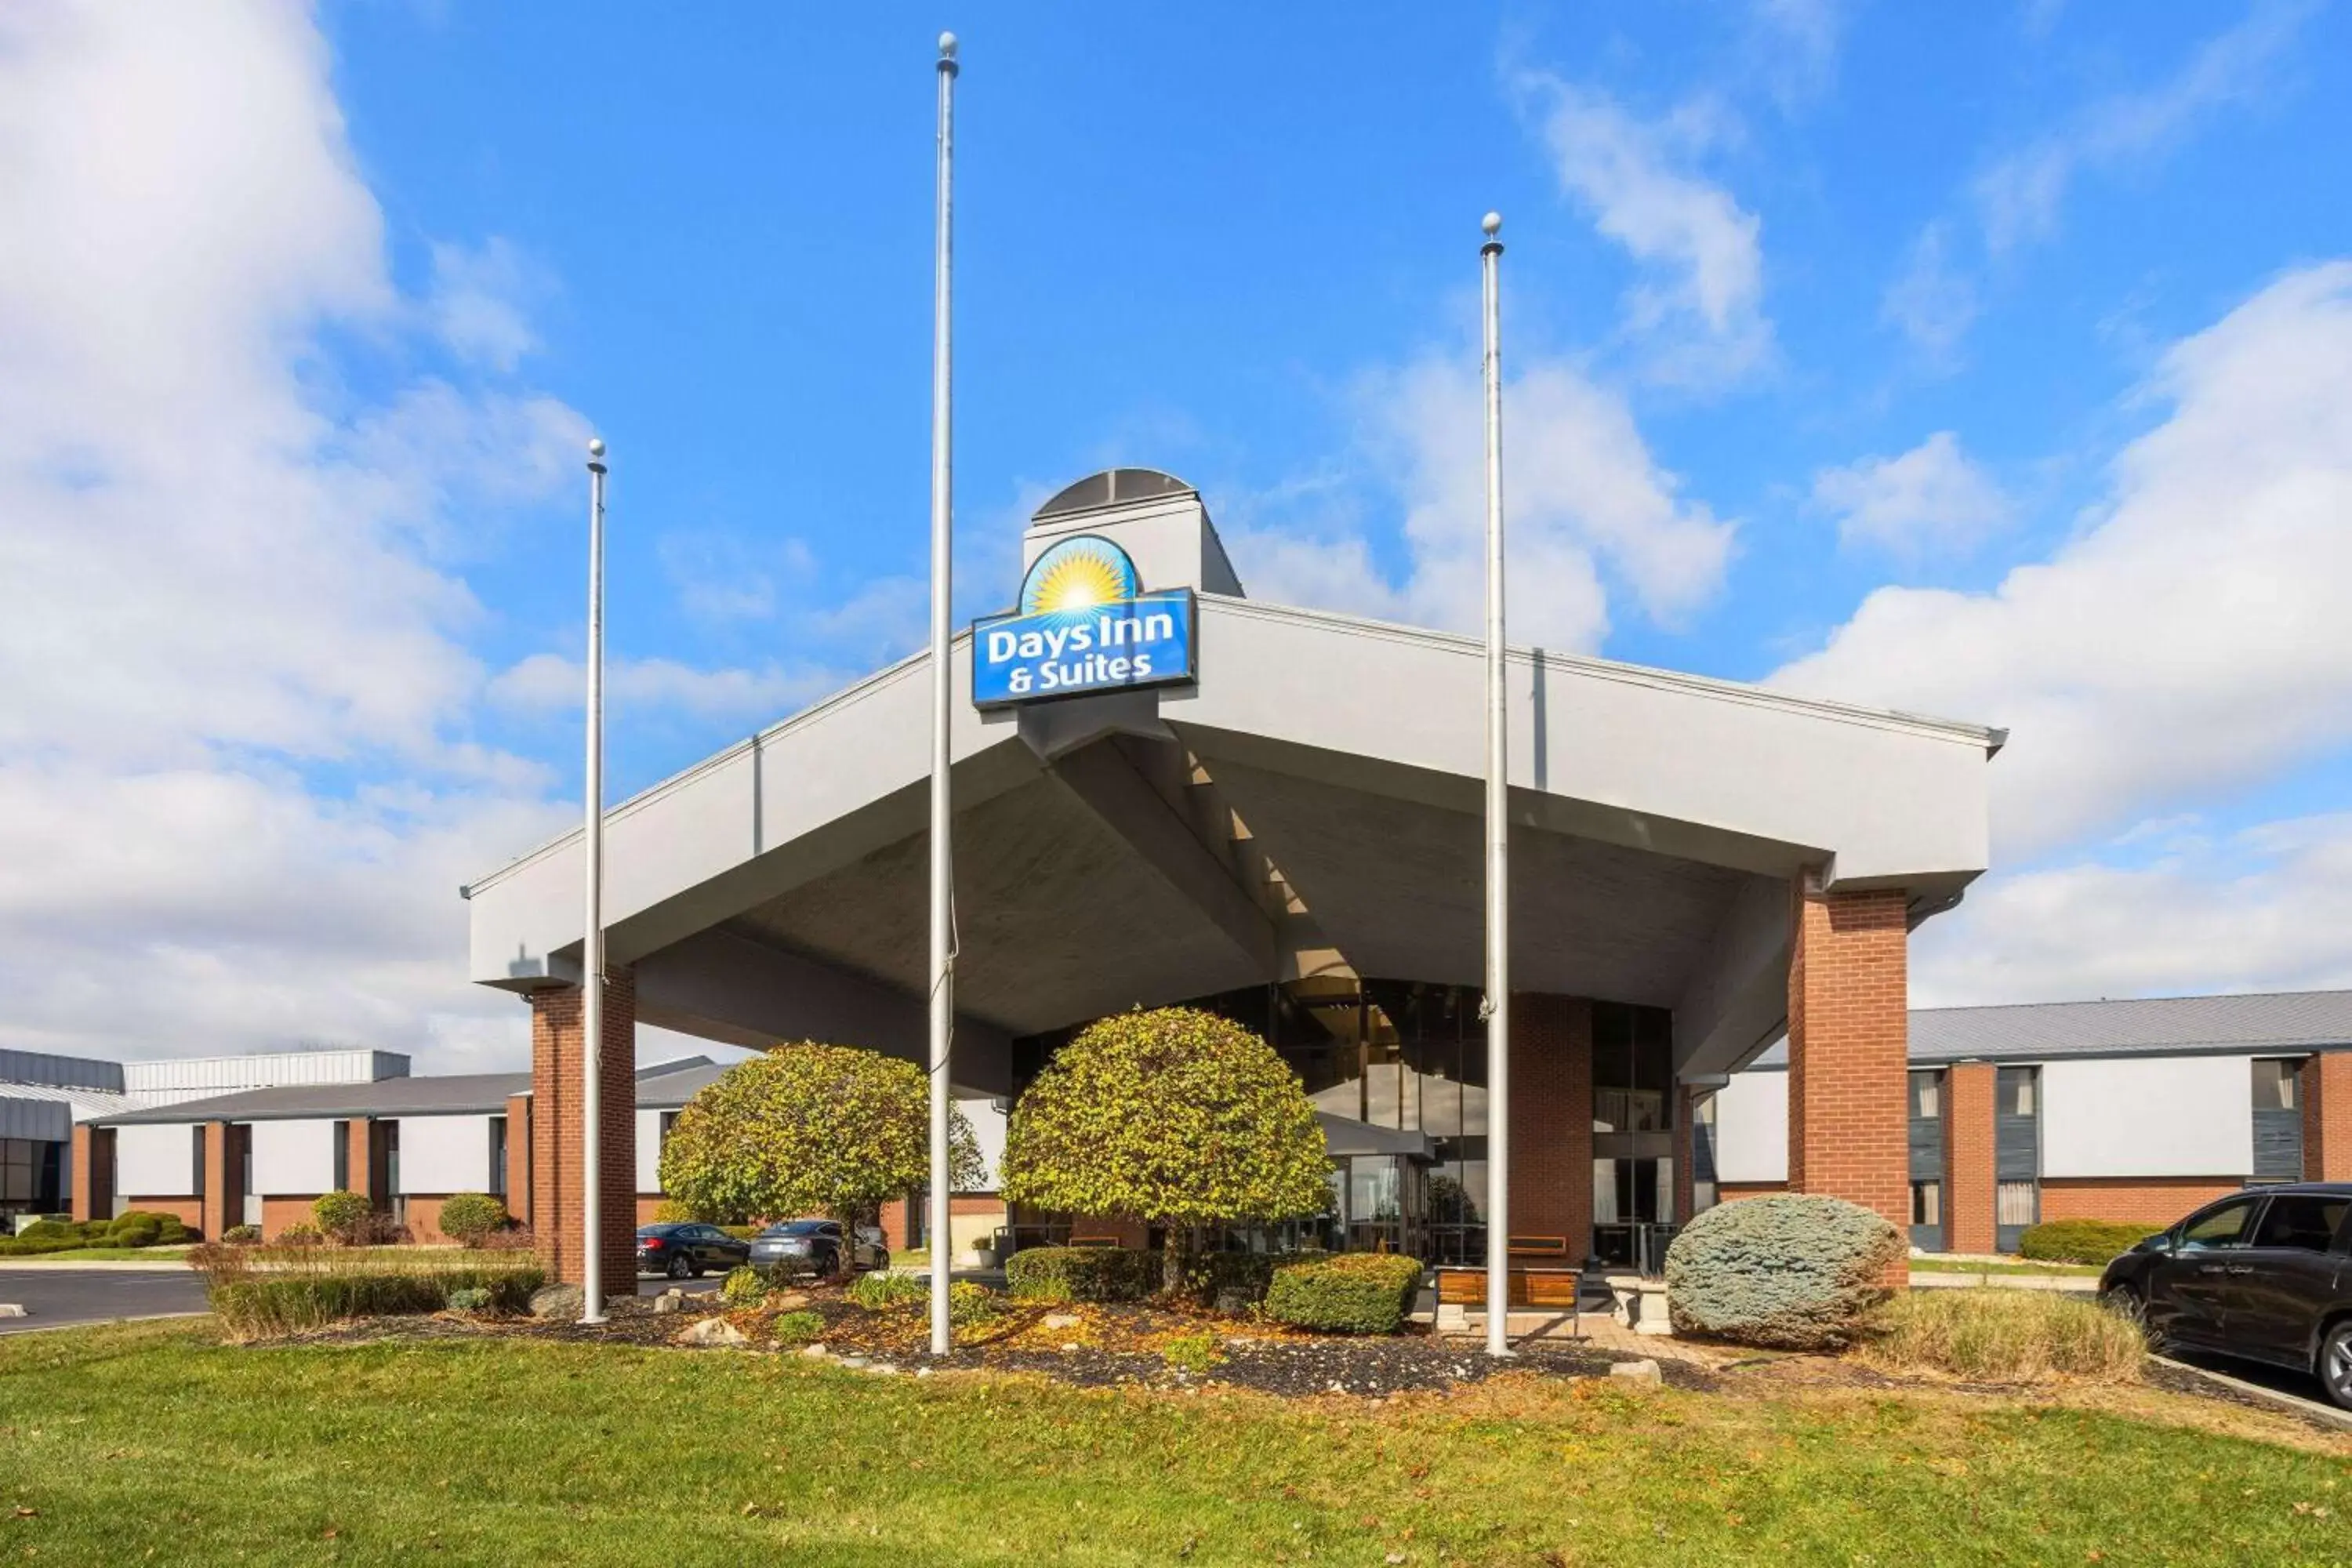 Property Building in Days Inn & Suites by Wyndham Northwest Indianapolis